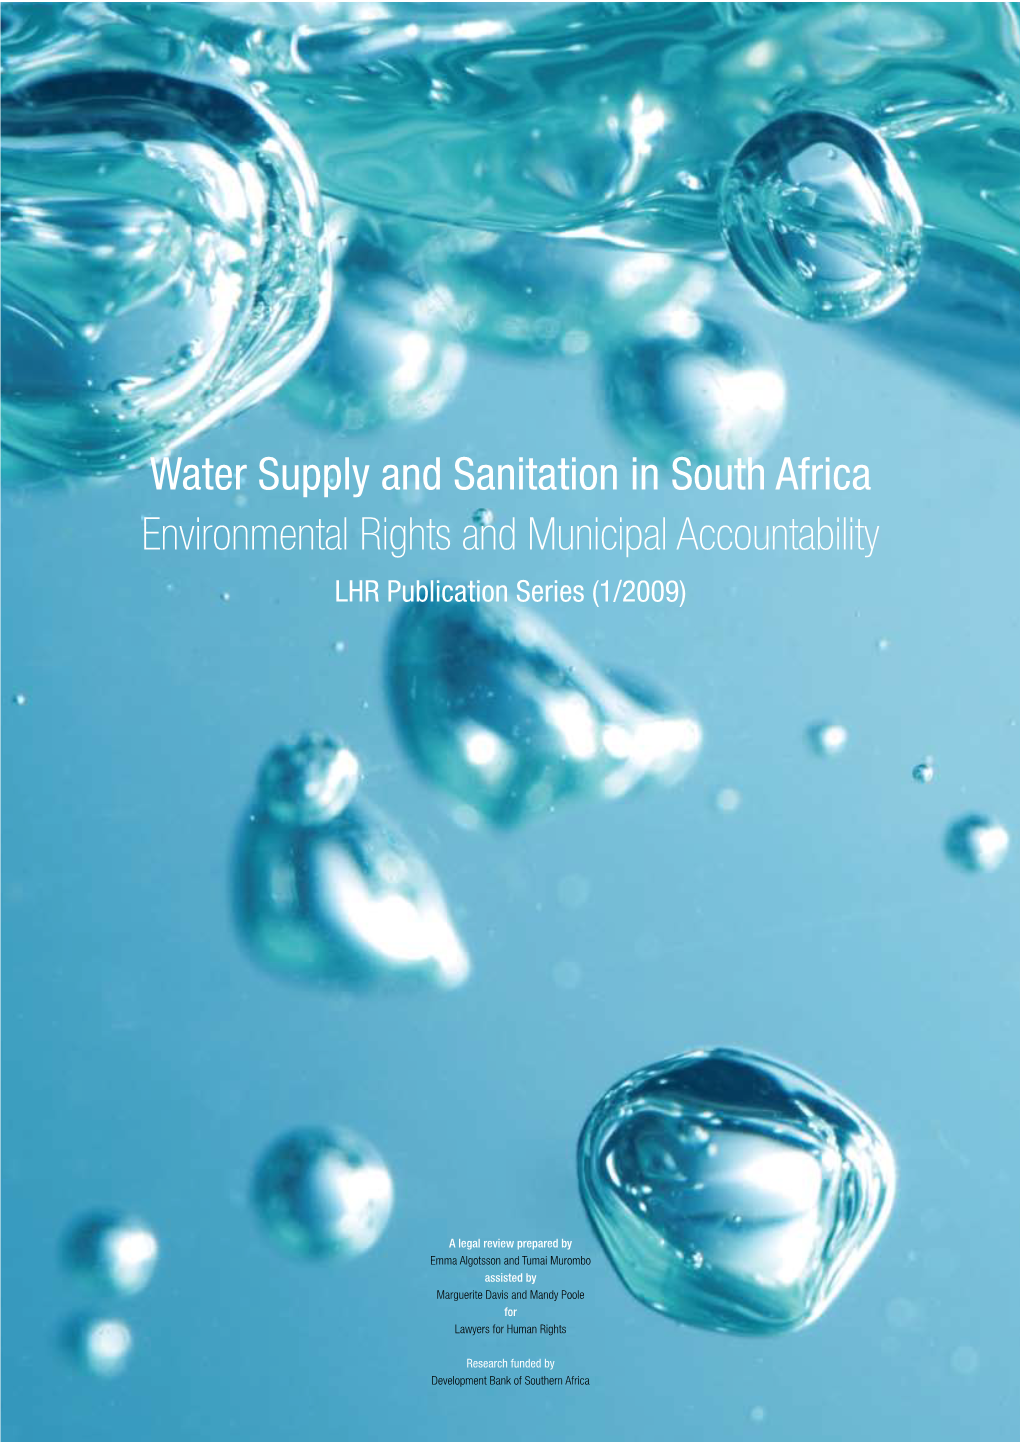 Water Supply and Sanitation in South Africa Environmental Rights and Municipal Accountability LHR Publication Series (1/2009)